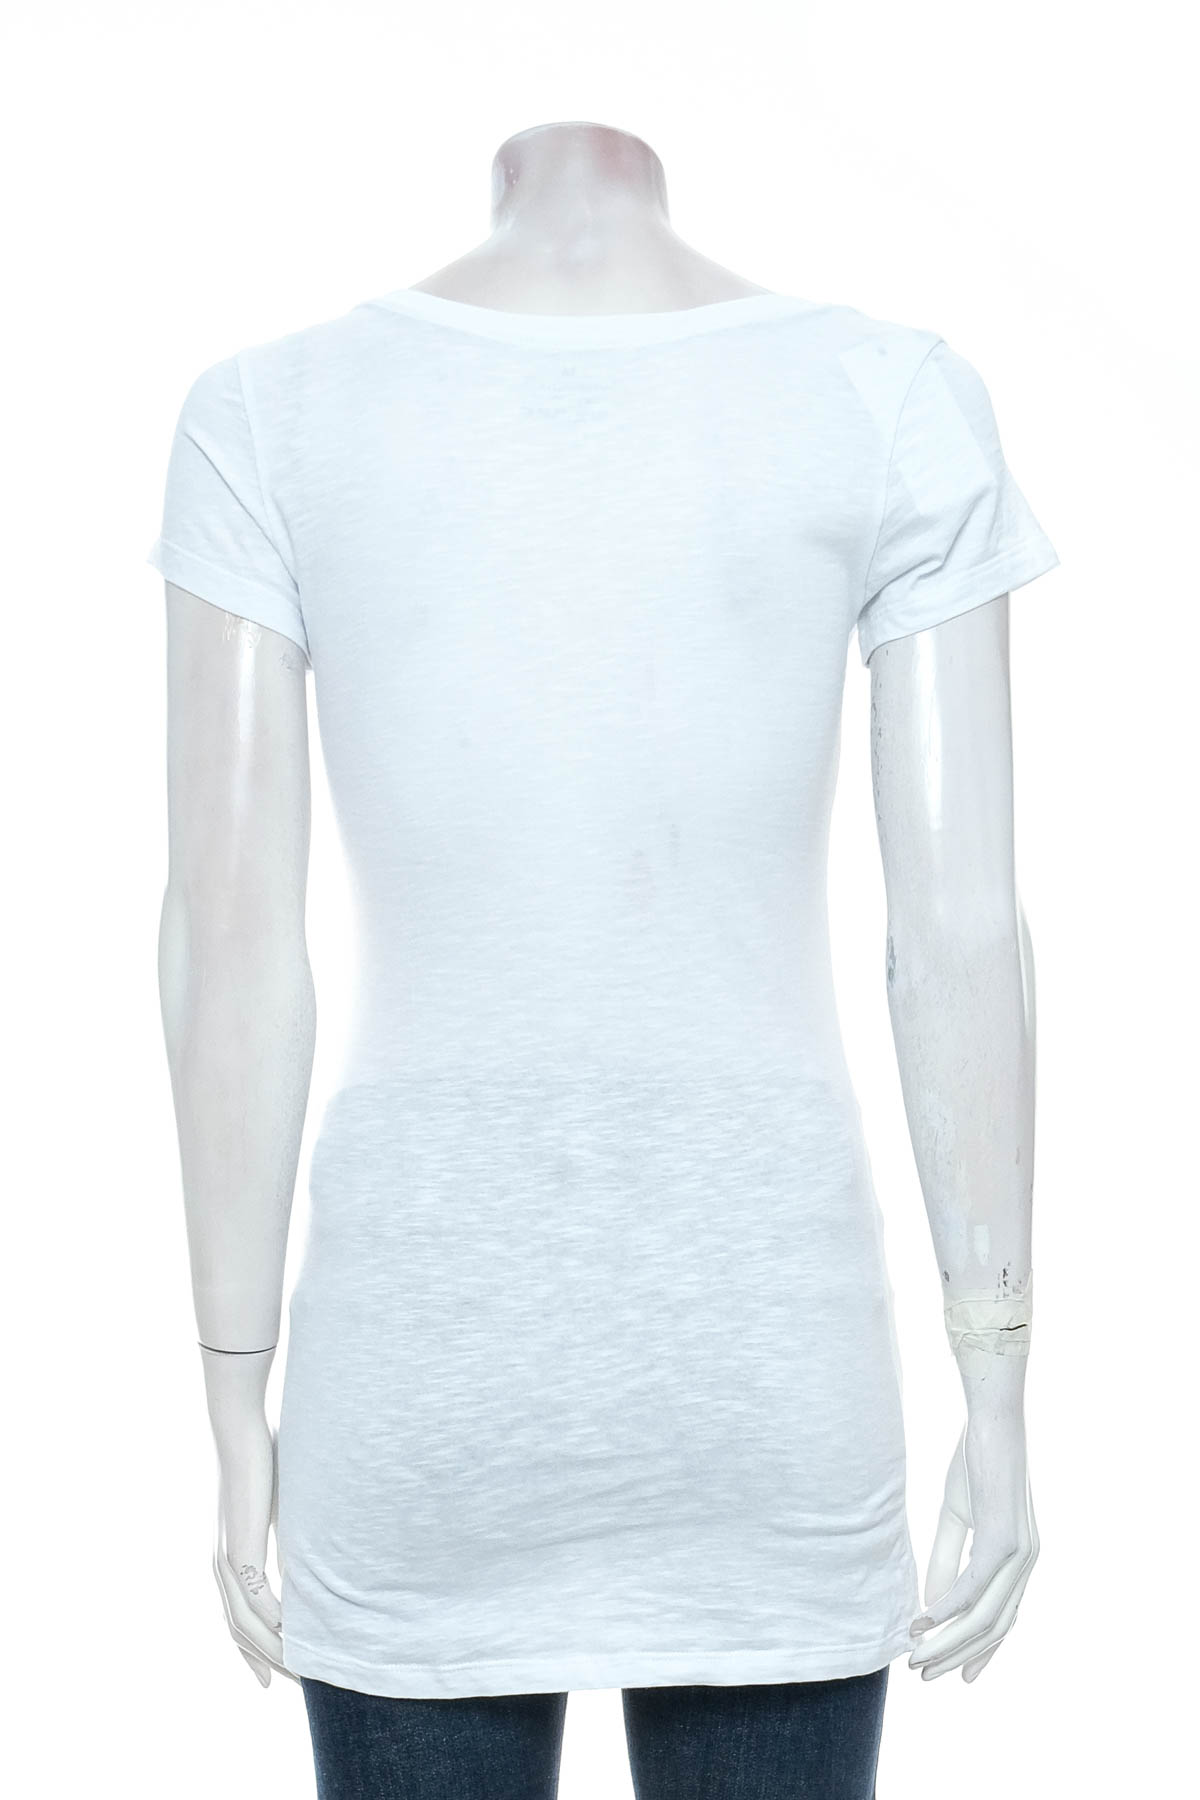 Women's t-shirt - Made in Italy - 1